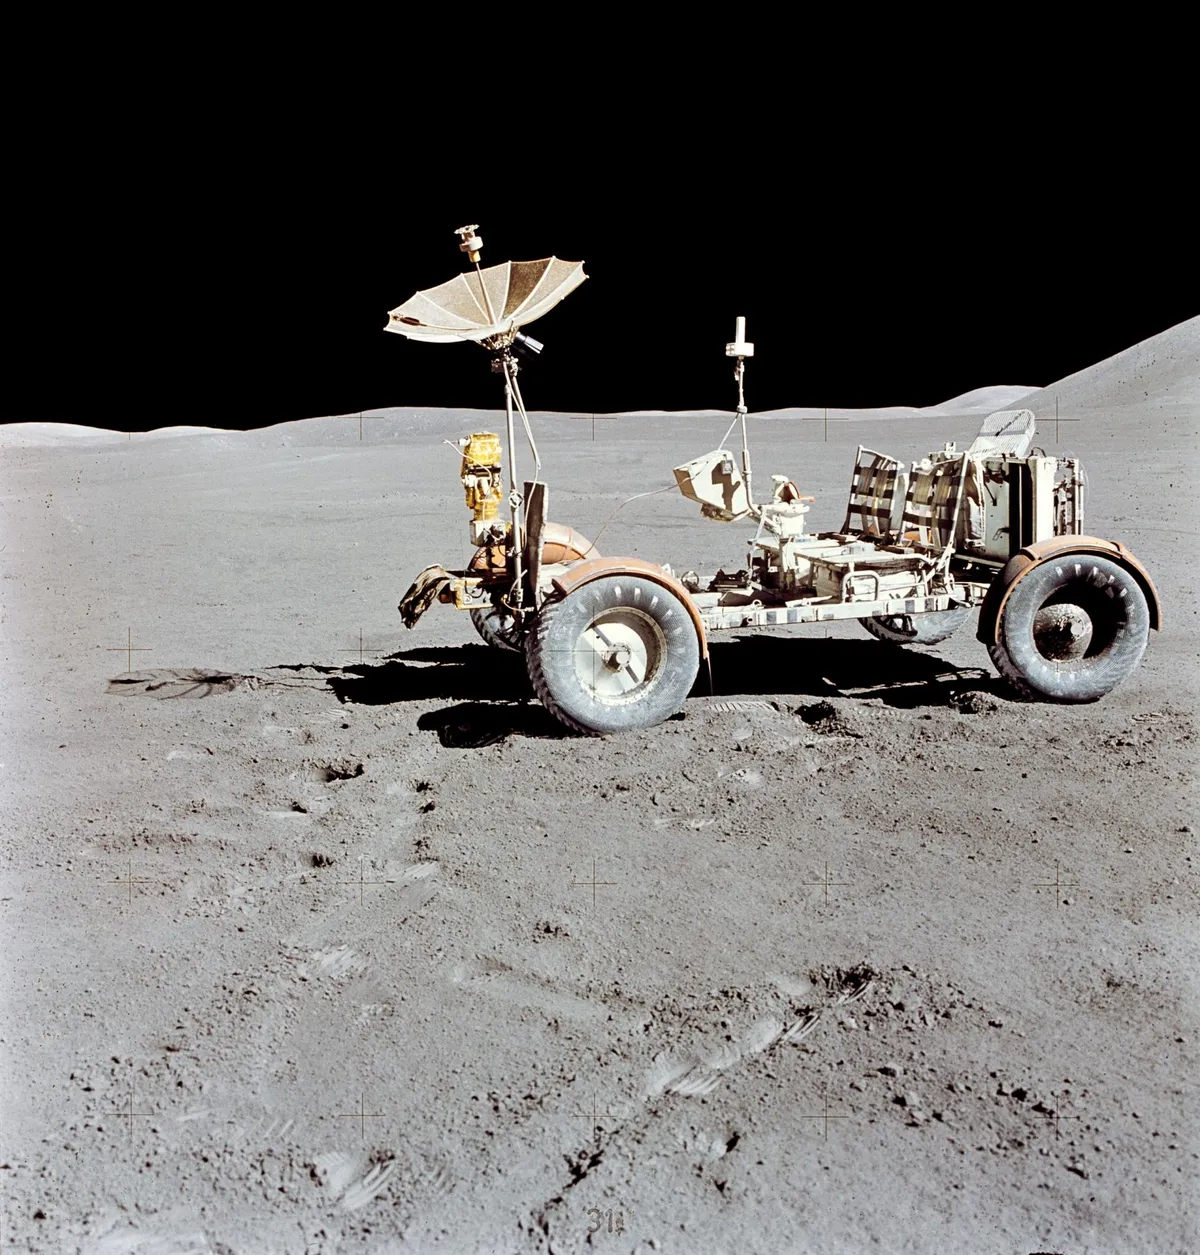 Lunar locomotion,1 August 1971.The Lunar Roving Vehicle photographed on the Moon during the third Apollo 15 lunar surface extravehicular activity at the Hadley-Apennine landing site.Credit: NASA